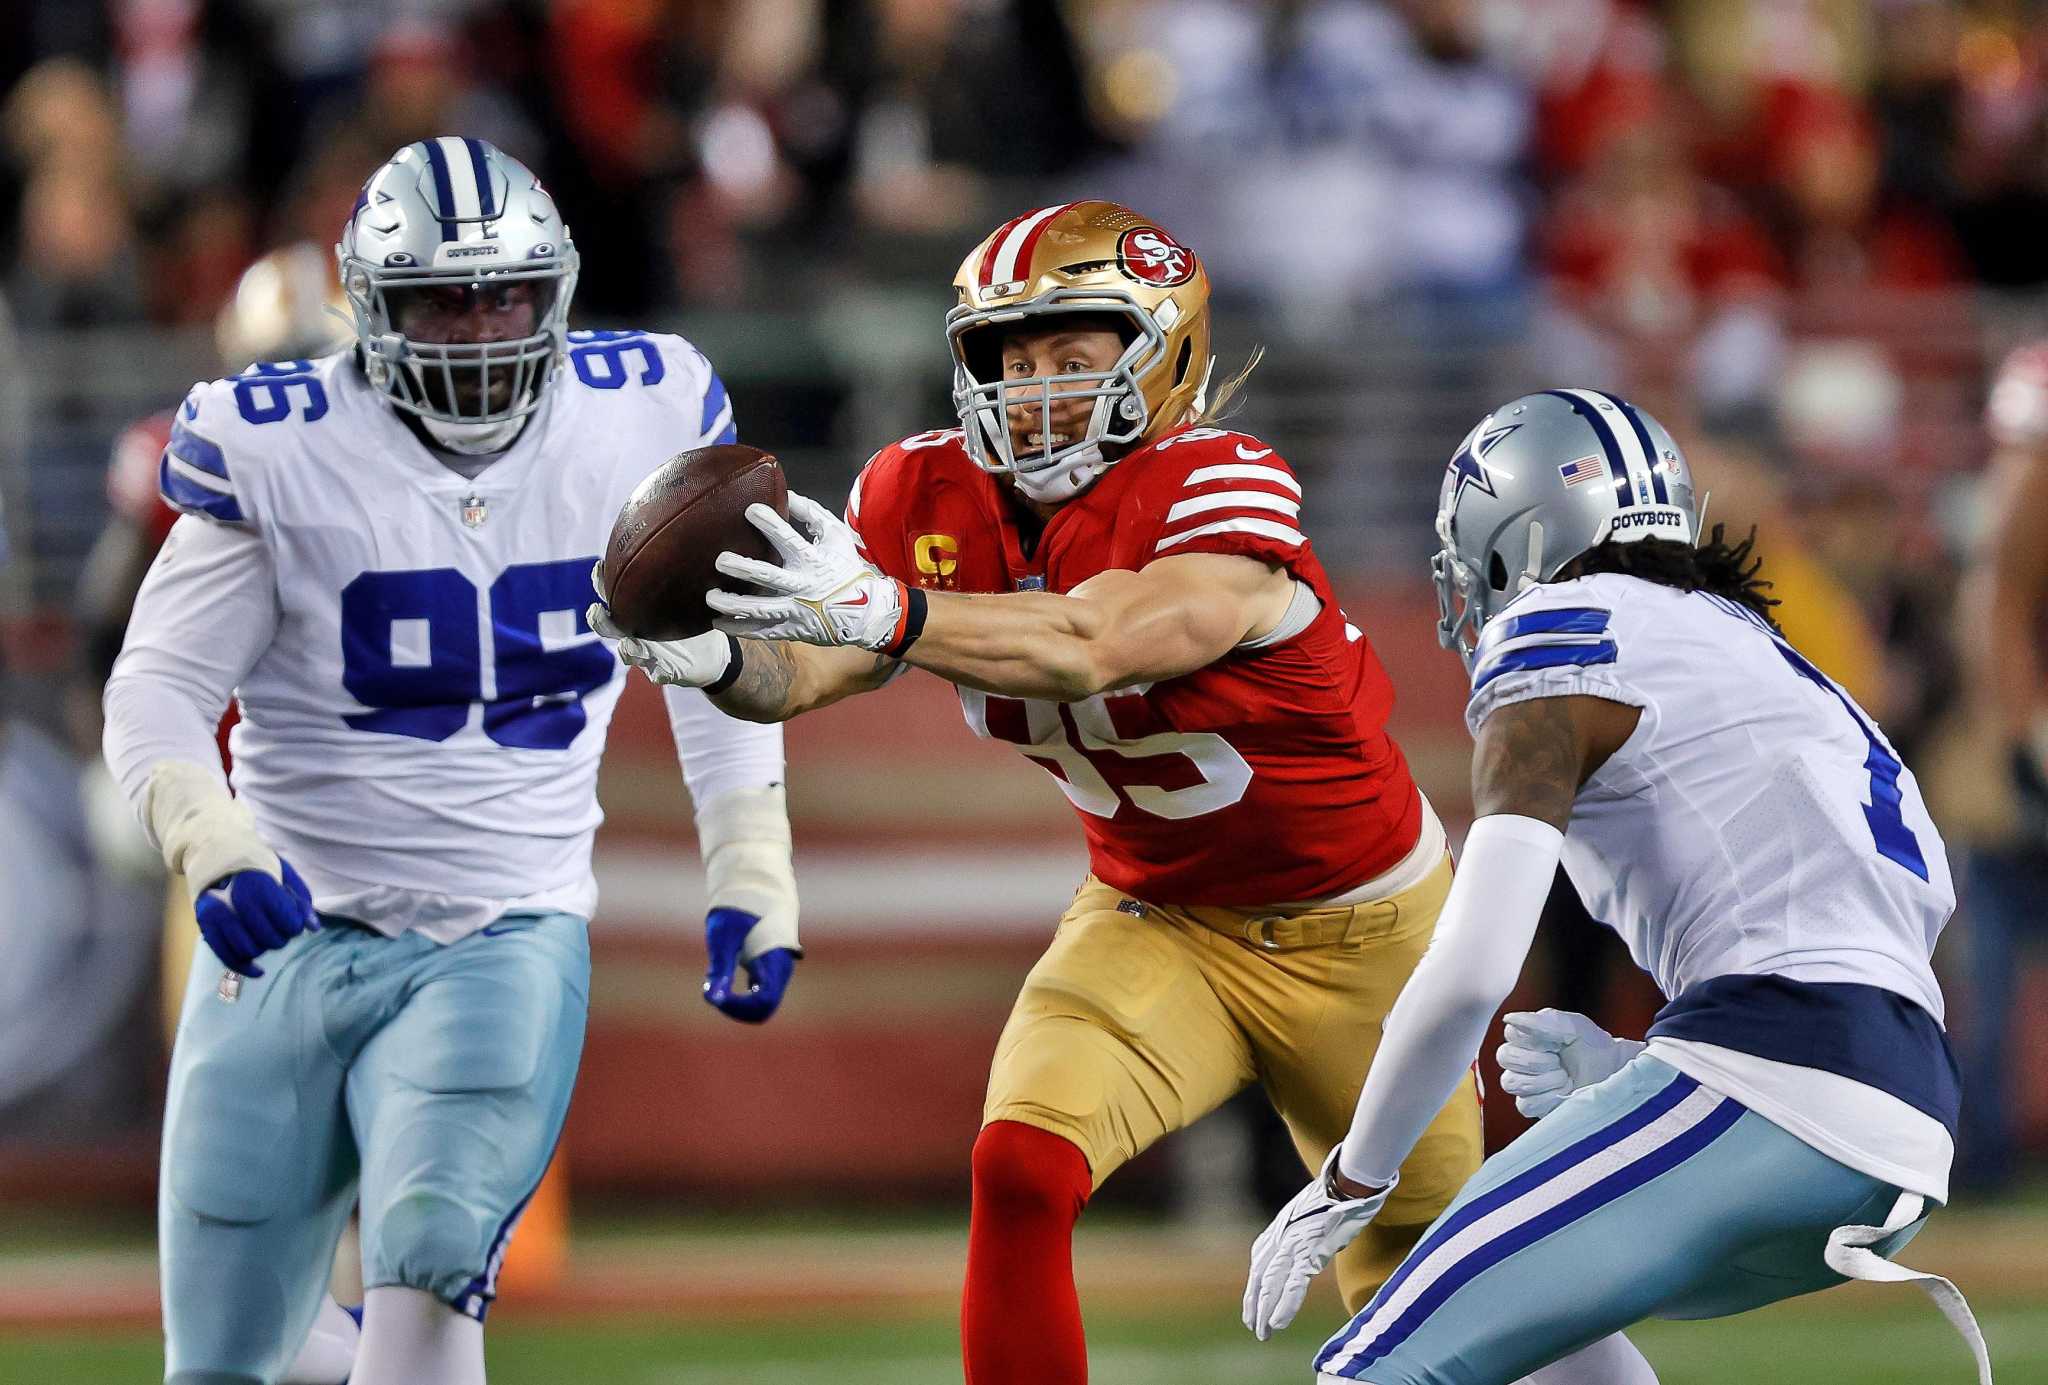 49ers vs. Cowboys playoff game: Why Niners have all the advantages